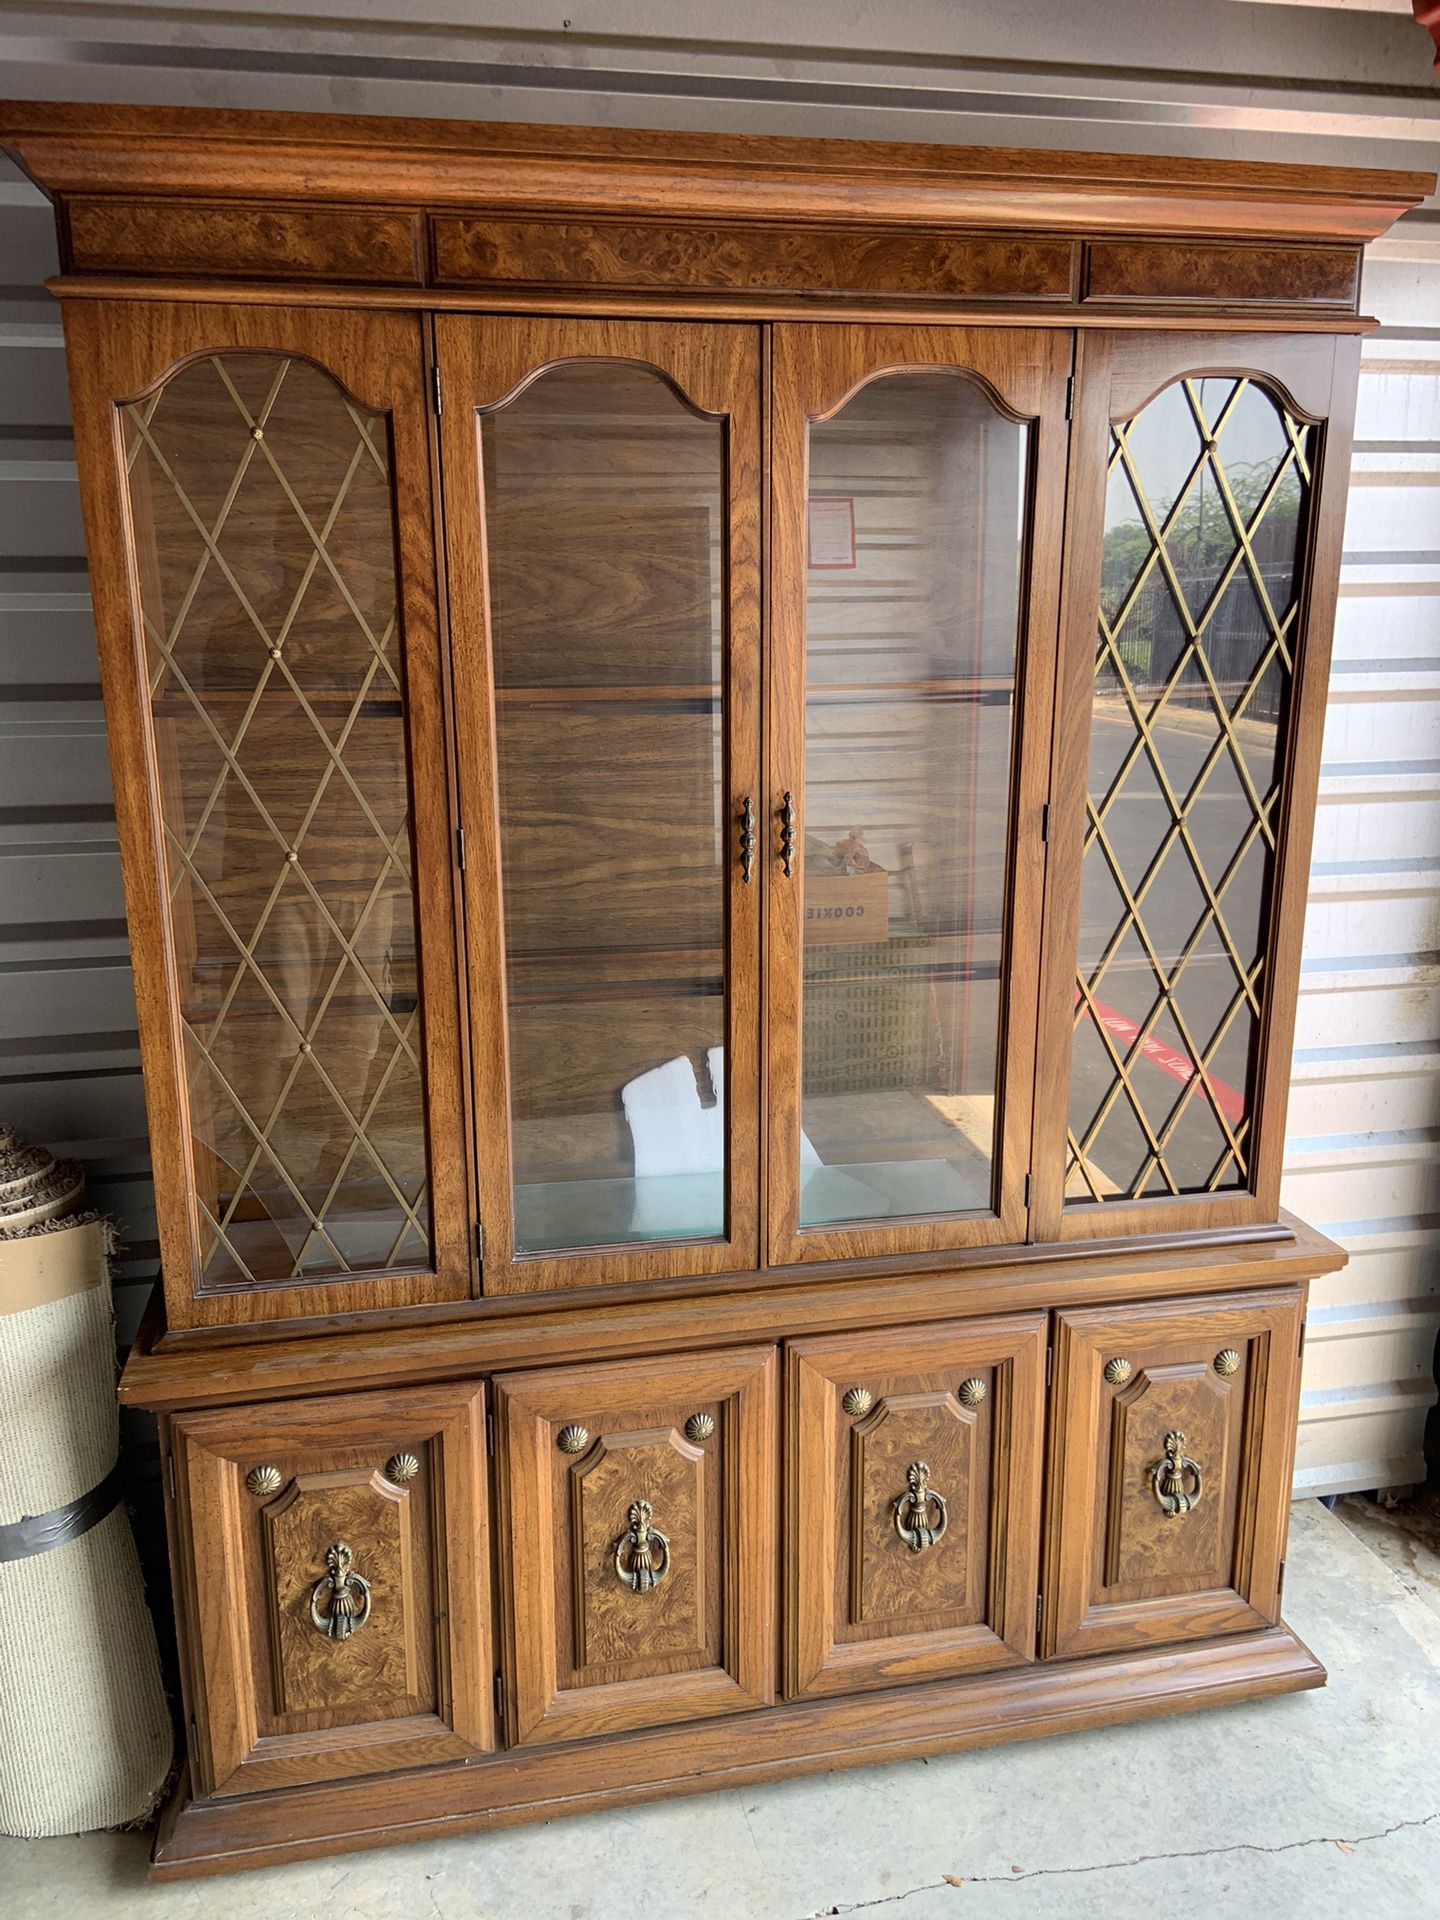 Antique 2 Piece Wood China Cabinet